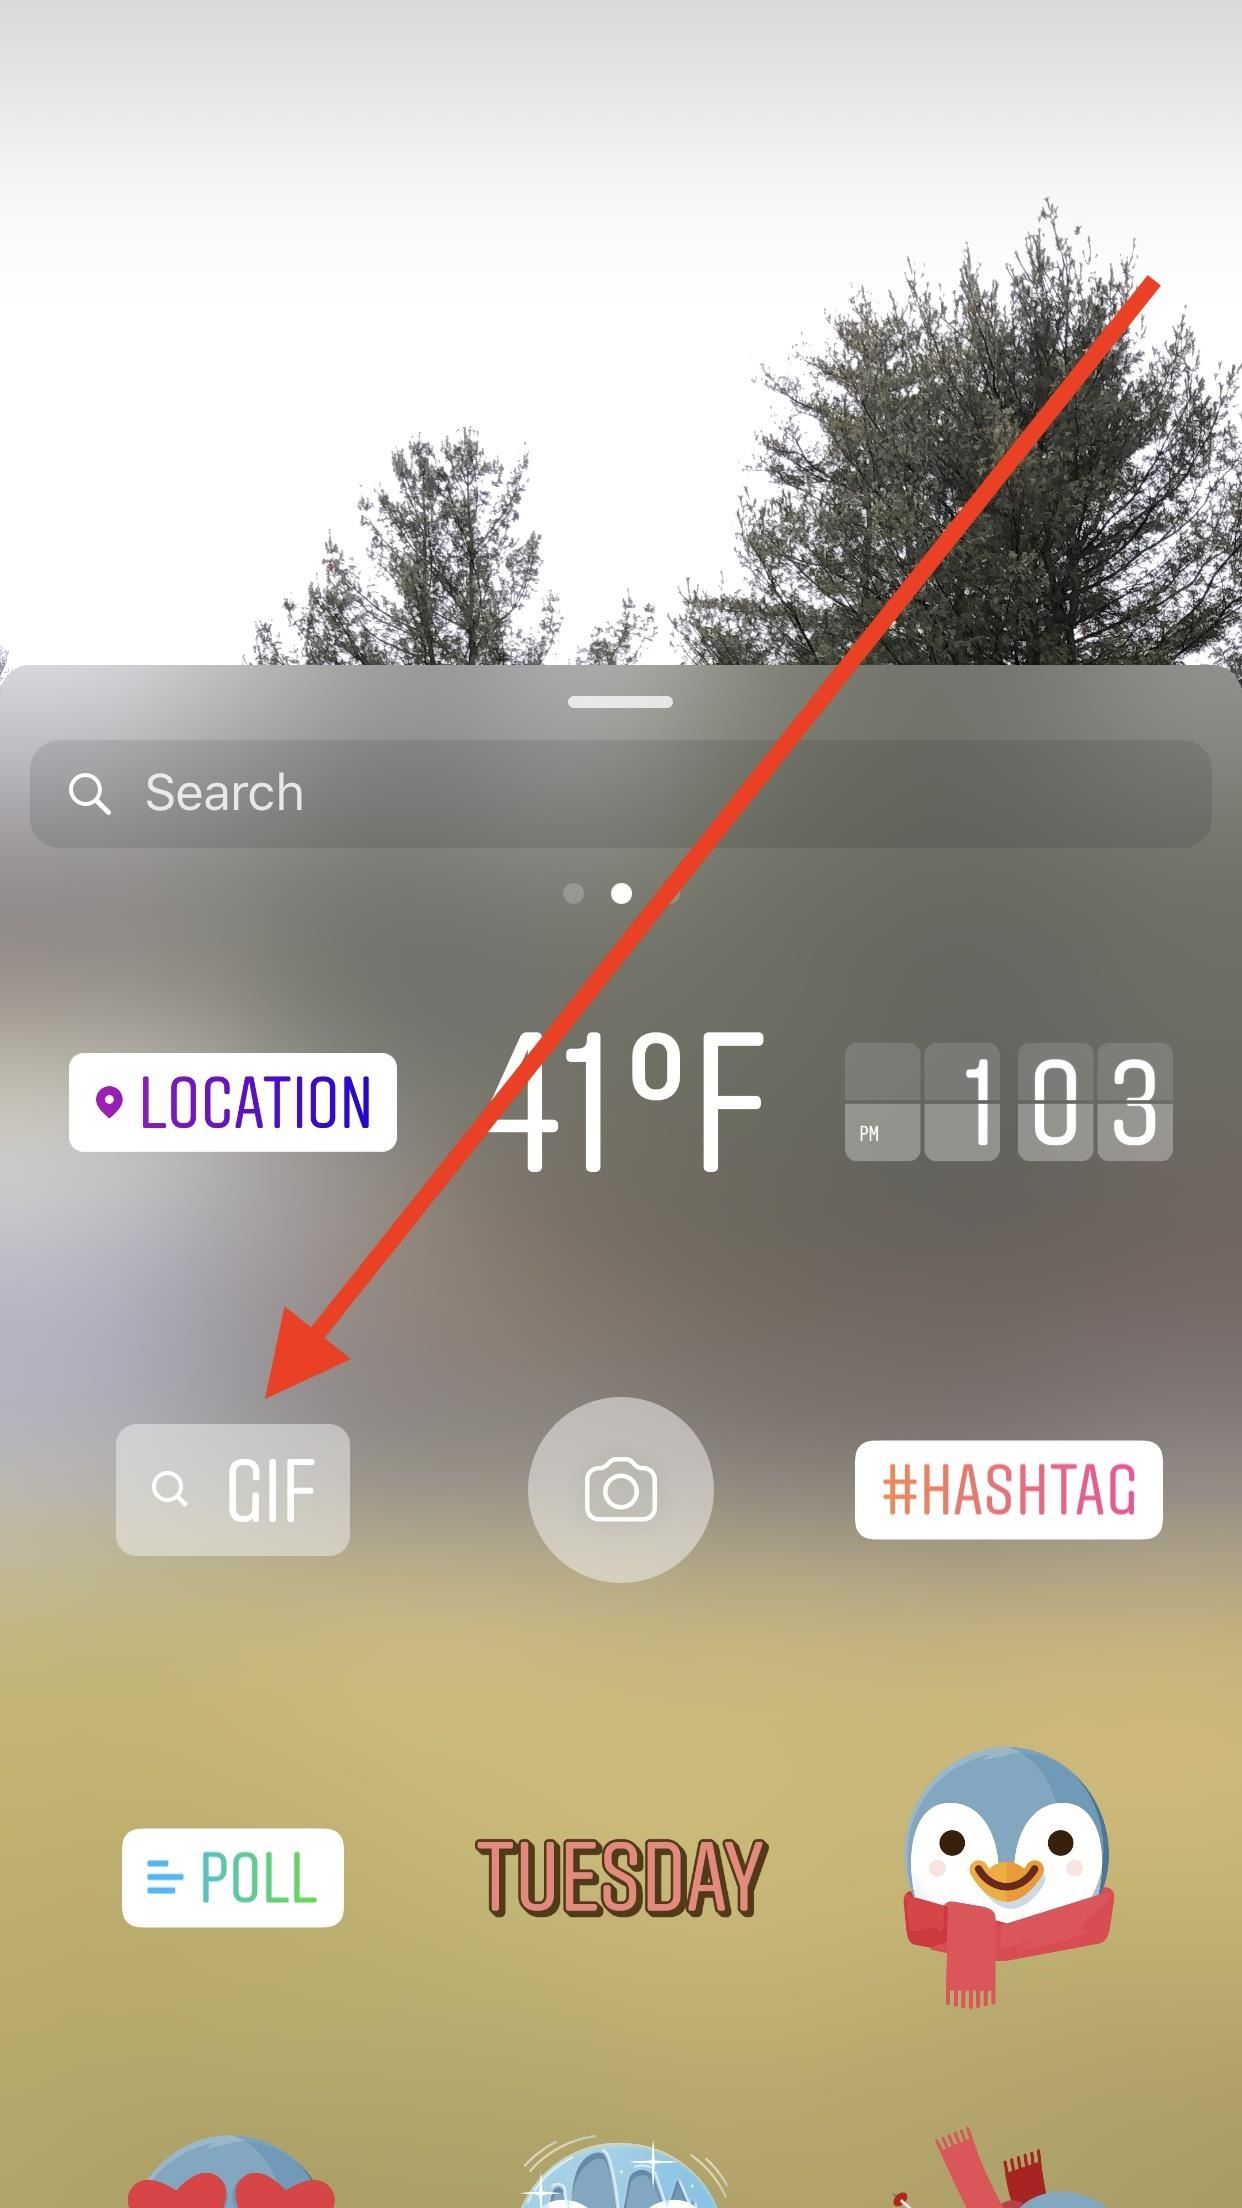 Instagram 101: How to Add Animated GIFs to Your Stories